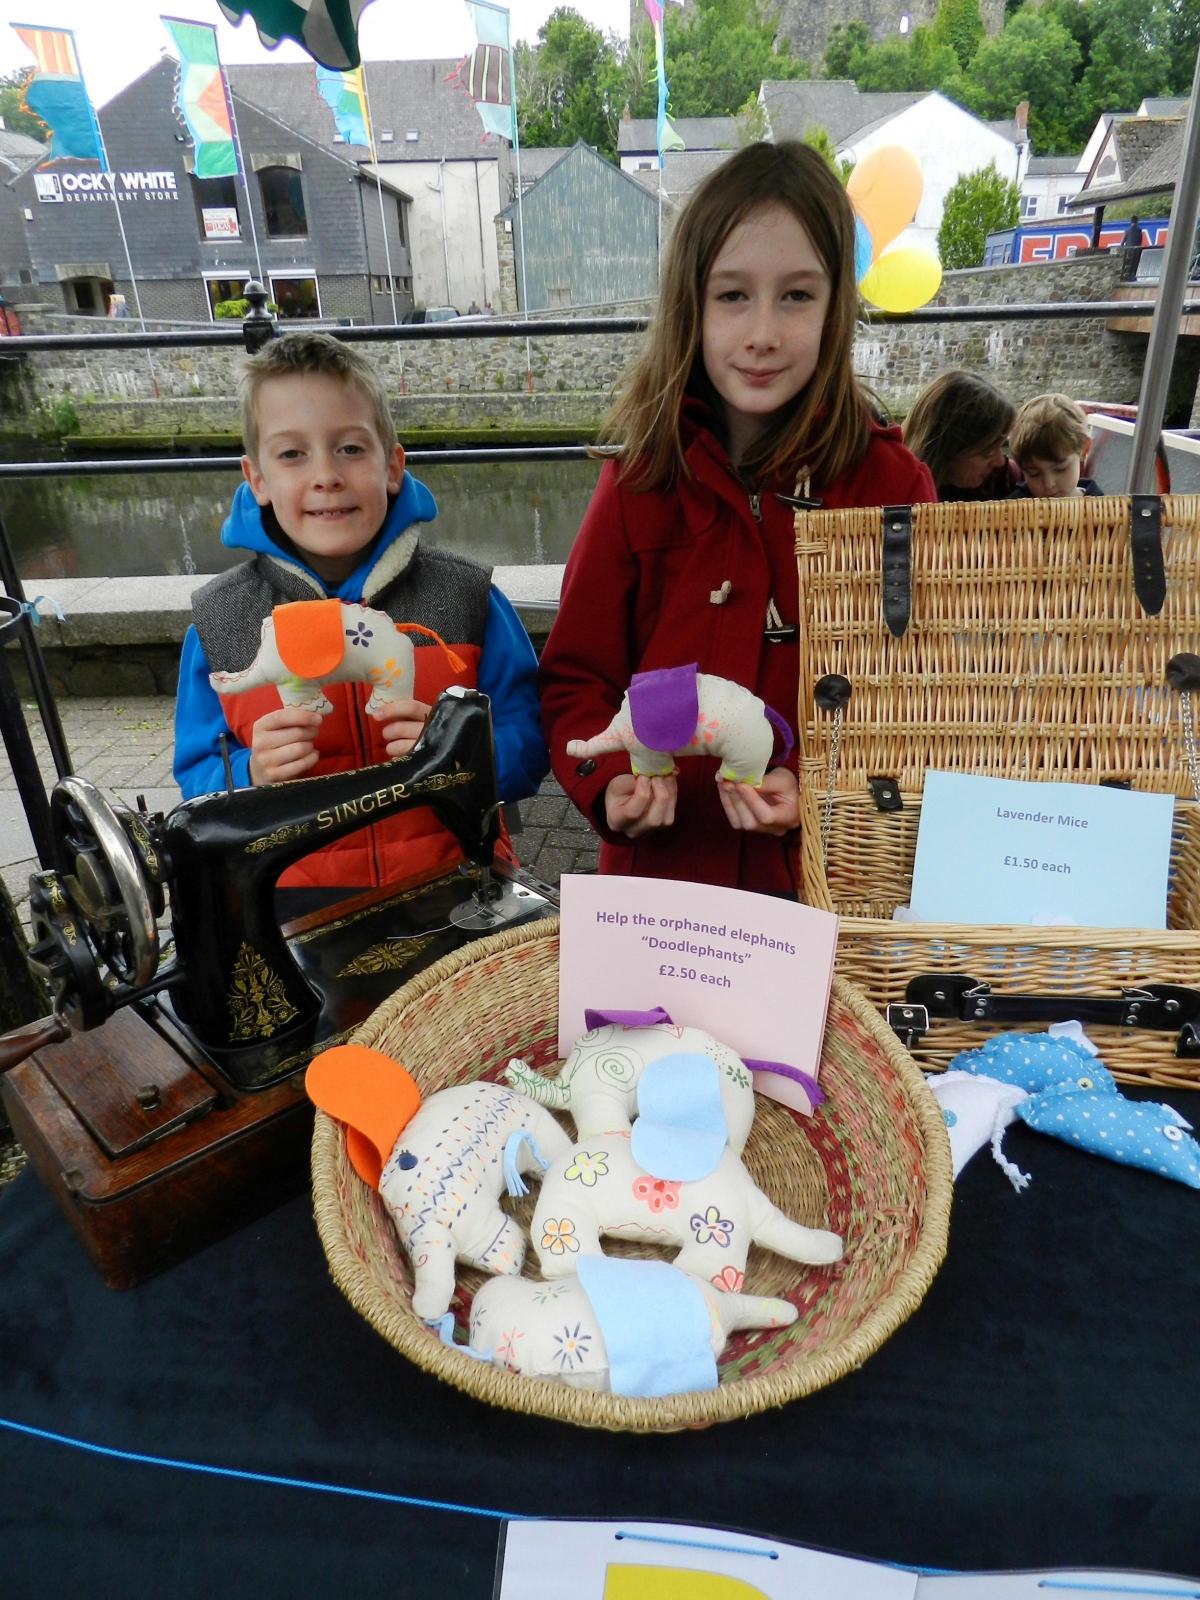 The home-schooled Pamment-Jones family had their own stall. Zara, 10, used a hand powered Singer sewing machine to make colourful elephants being sold in a good cause. She is pictured with Freddie, 9.
